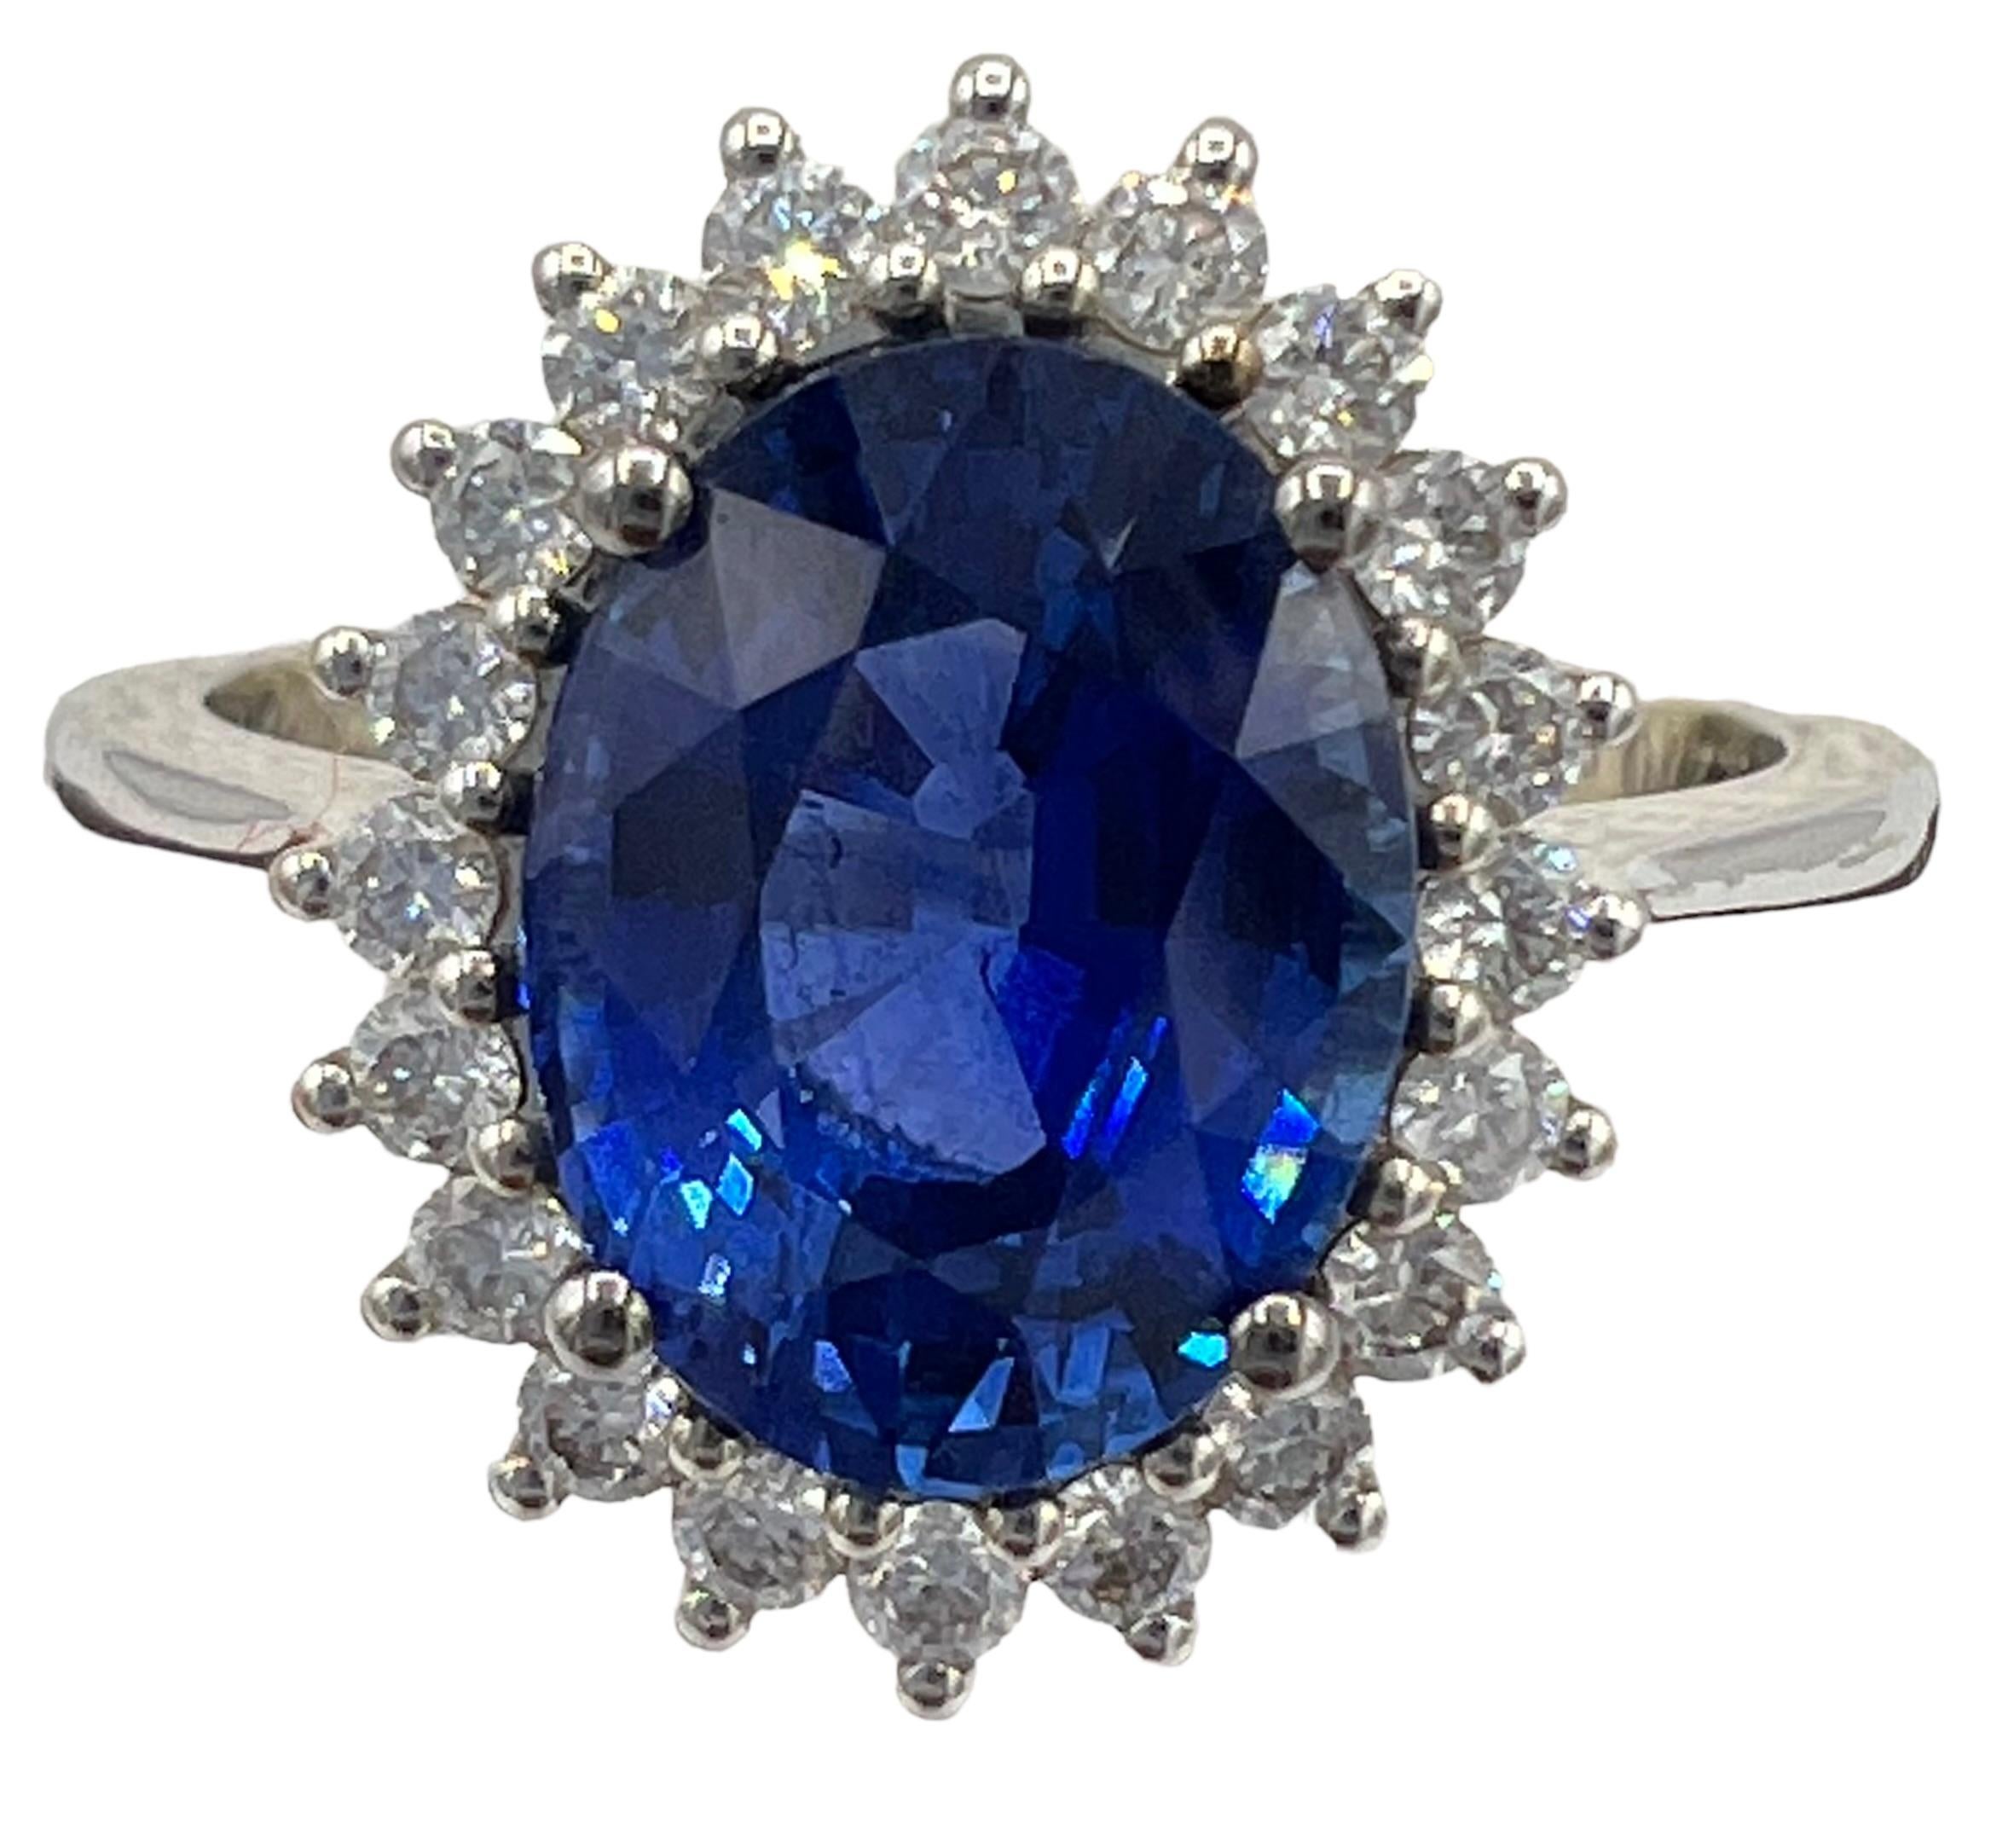 Women's Engagement Ring 18 Carat Gold Set with a Certified Natural Sapphire 3.27 Carat